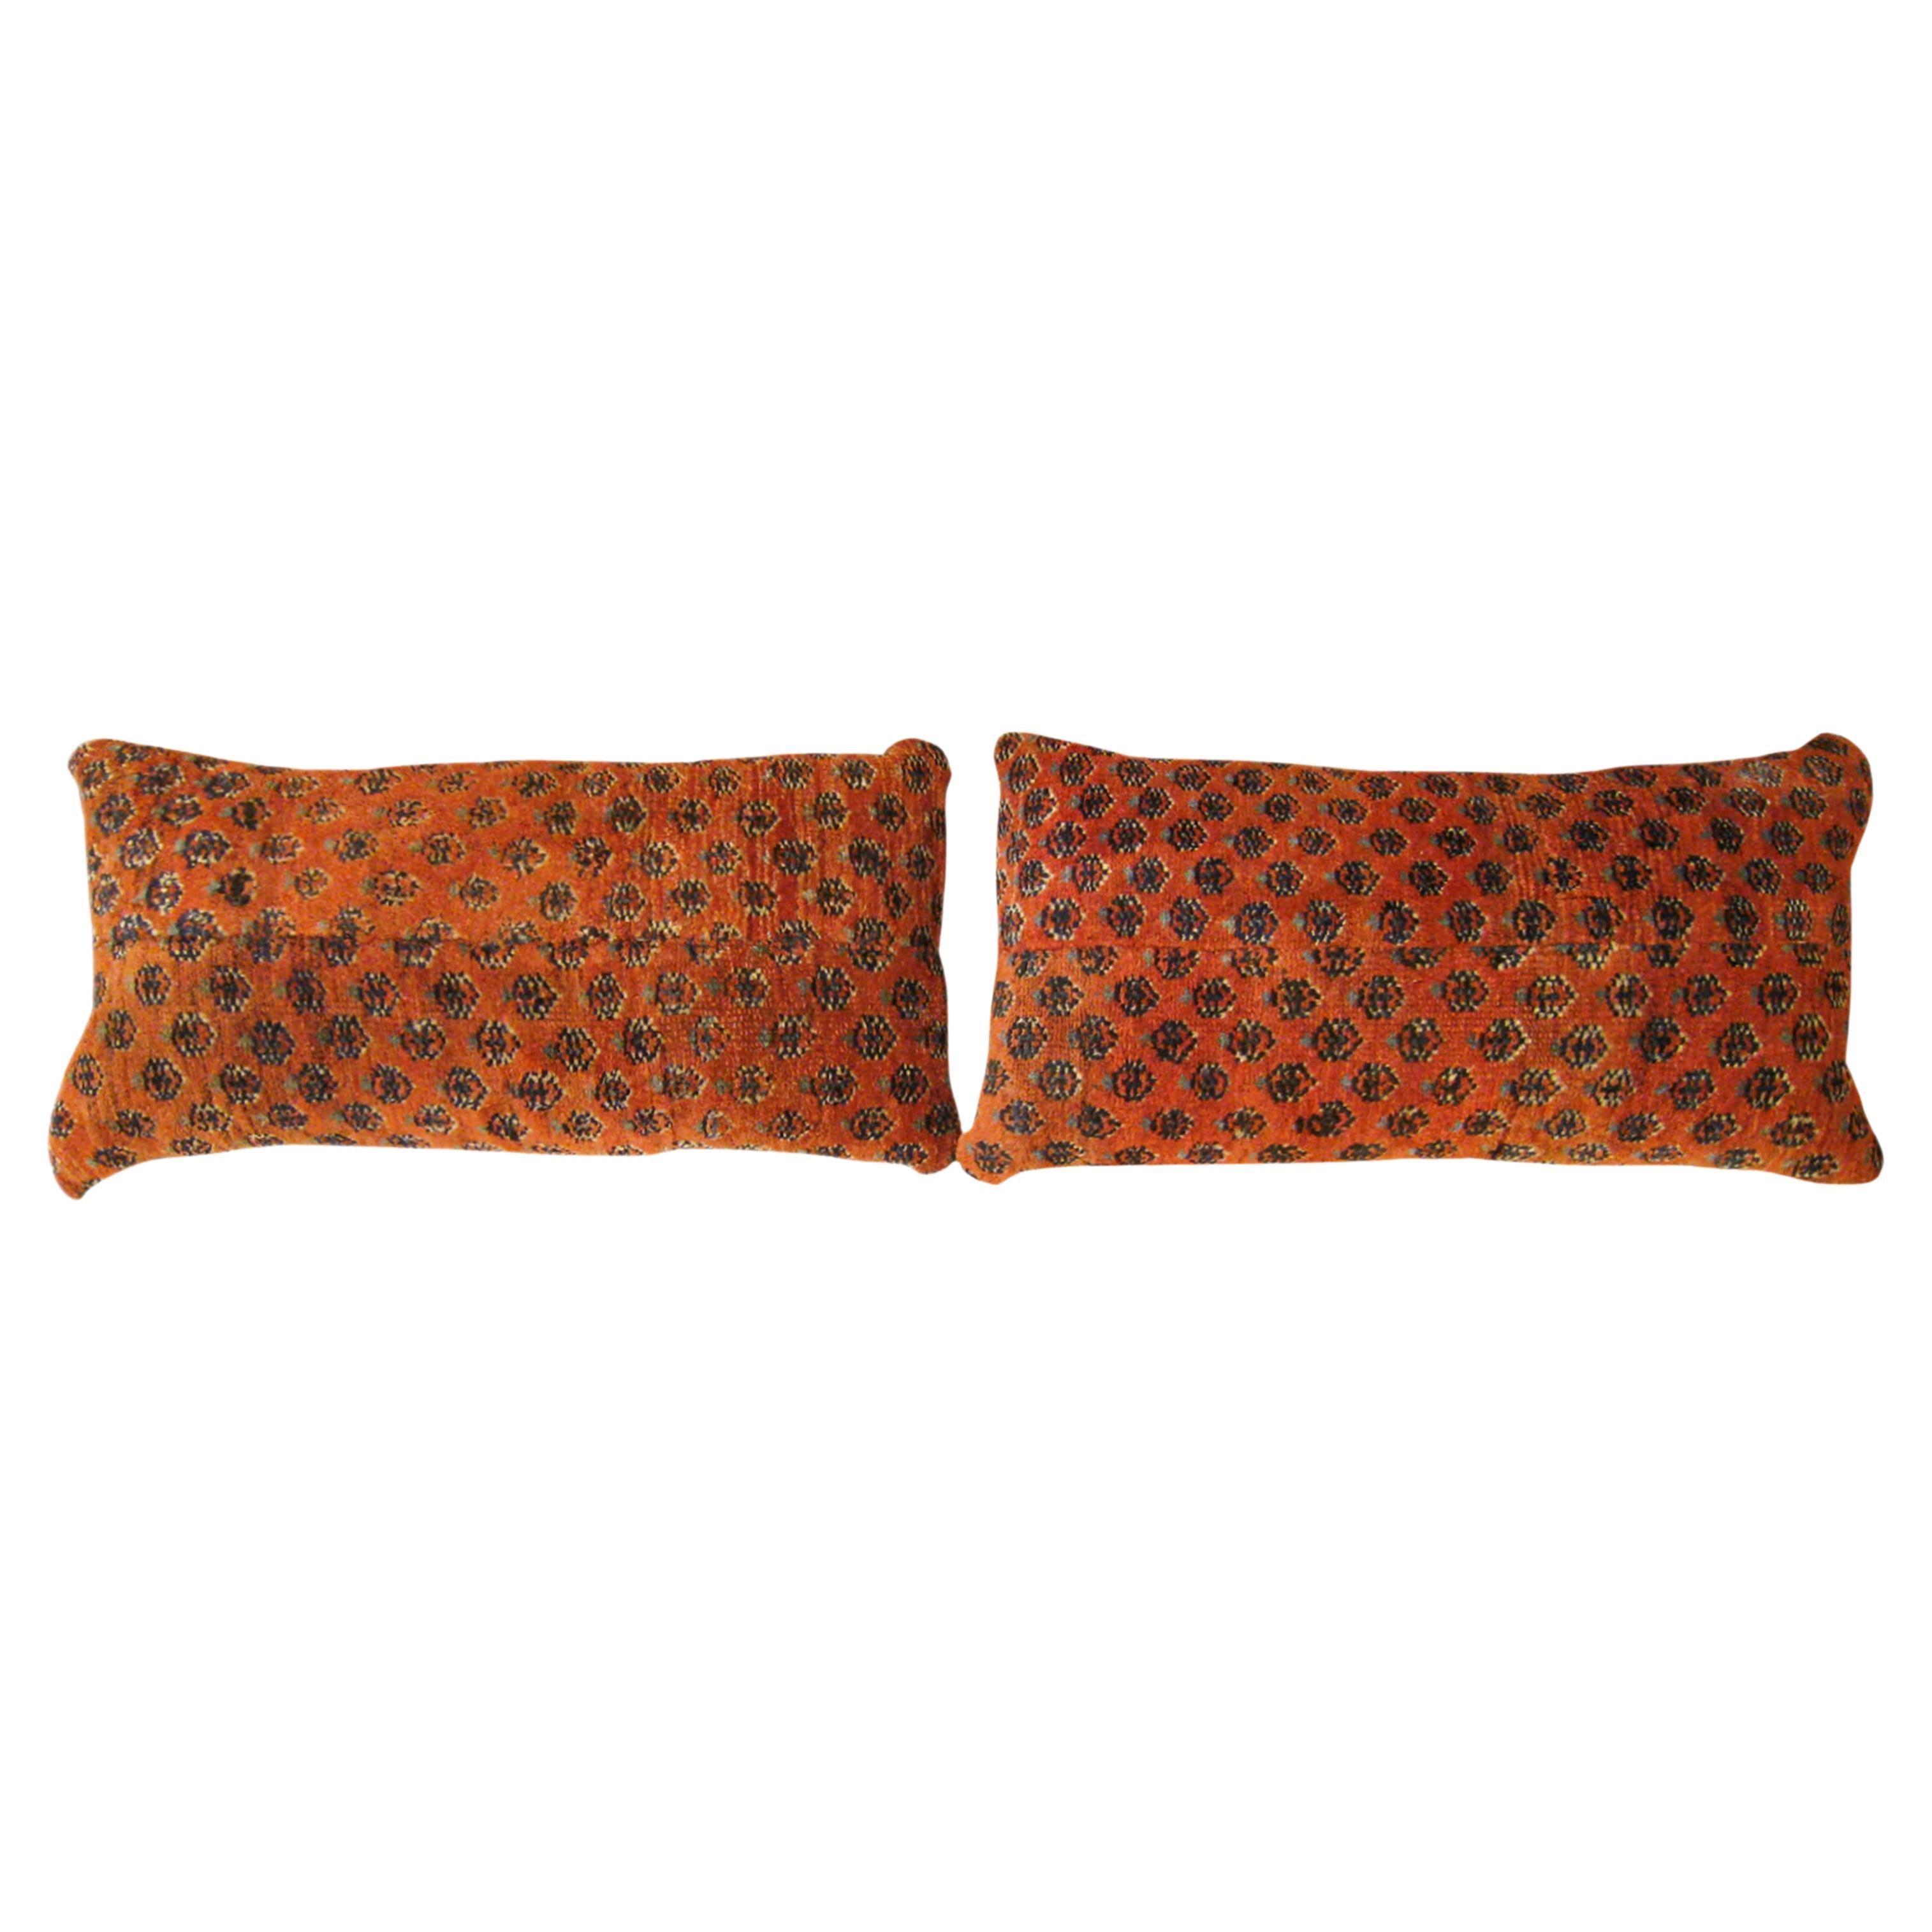 Pair of Decorative Antique Persian Saraband Carpet Pillows with Floral Element